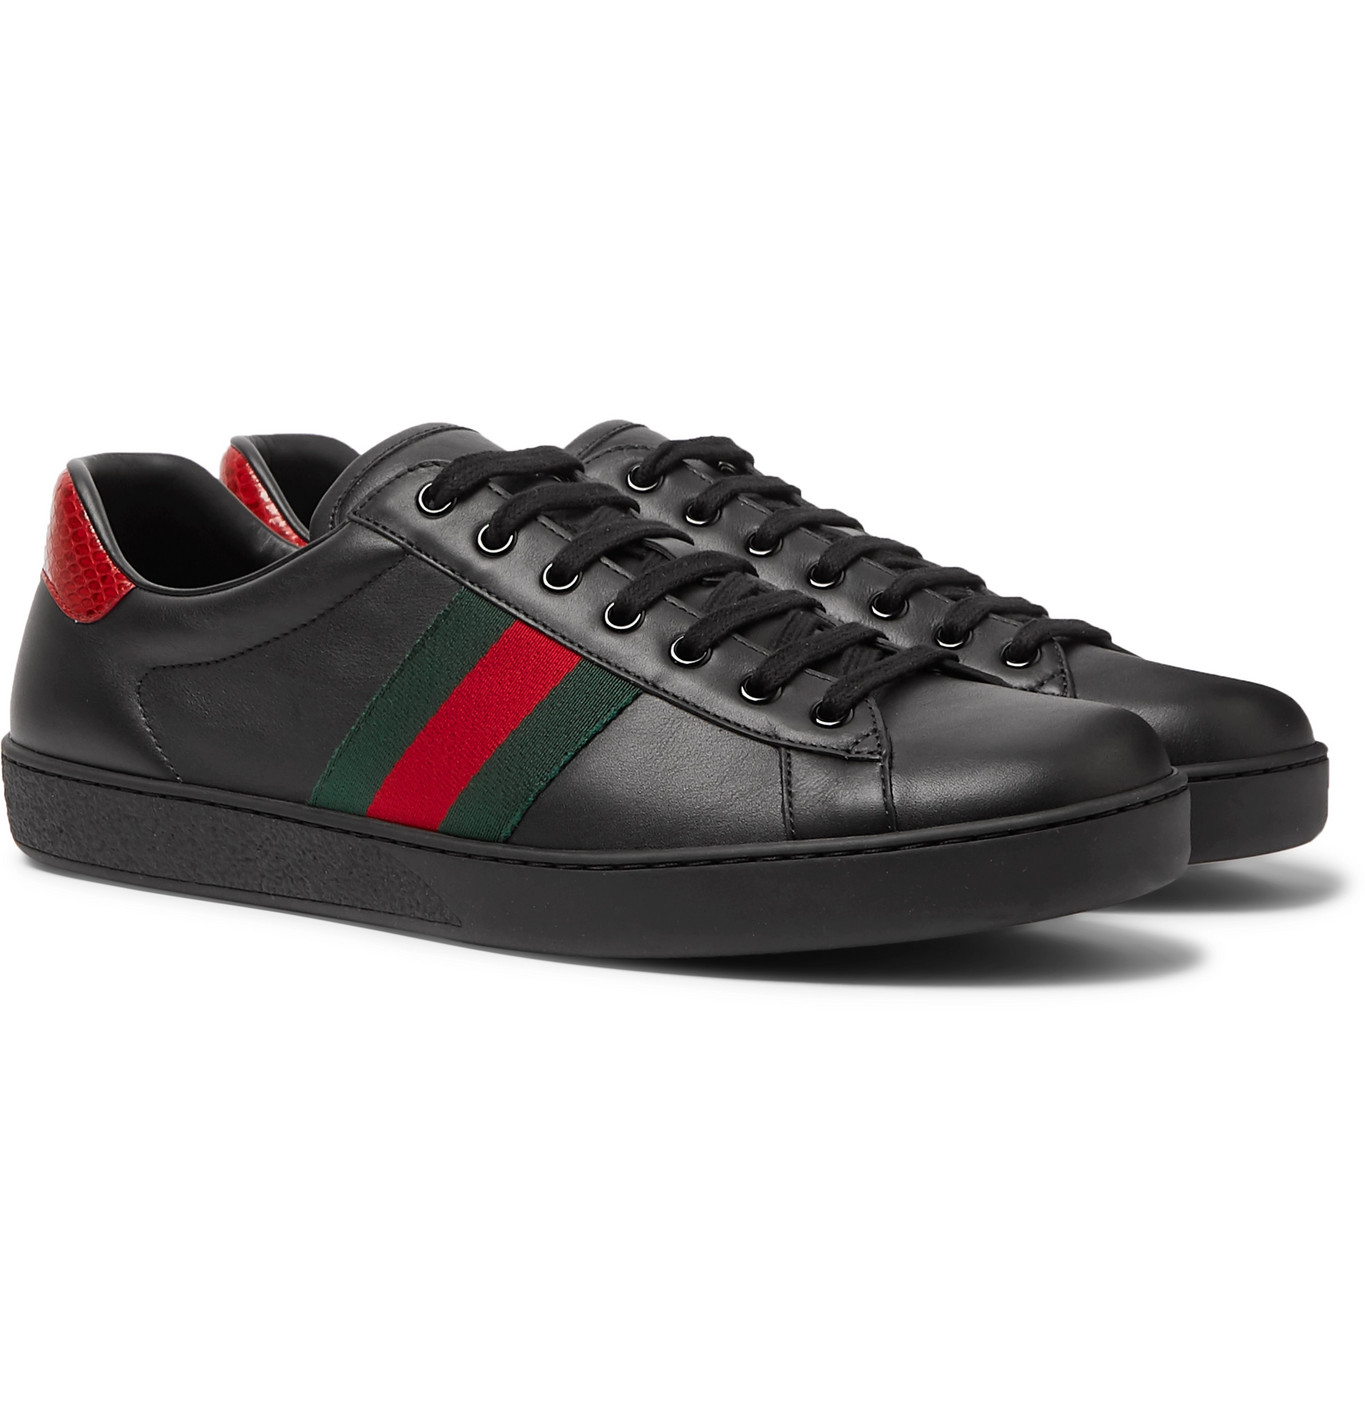 Gucci - Ace Crocodile-Trimmed Leather Sneakers - Men - Black | The ...